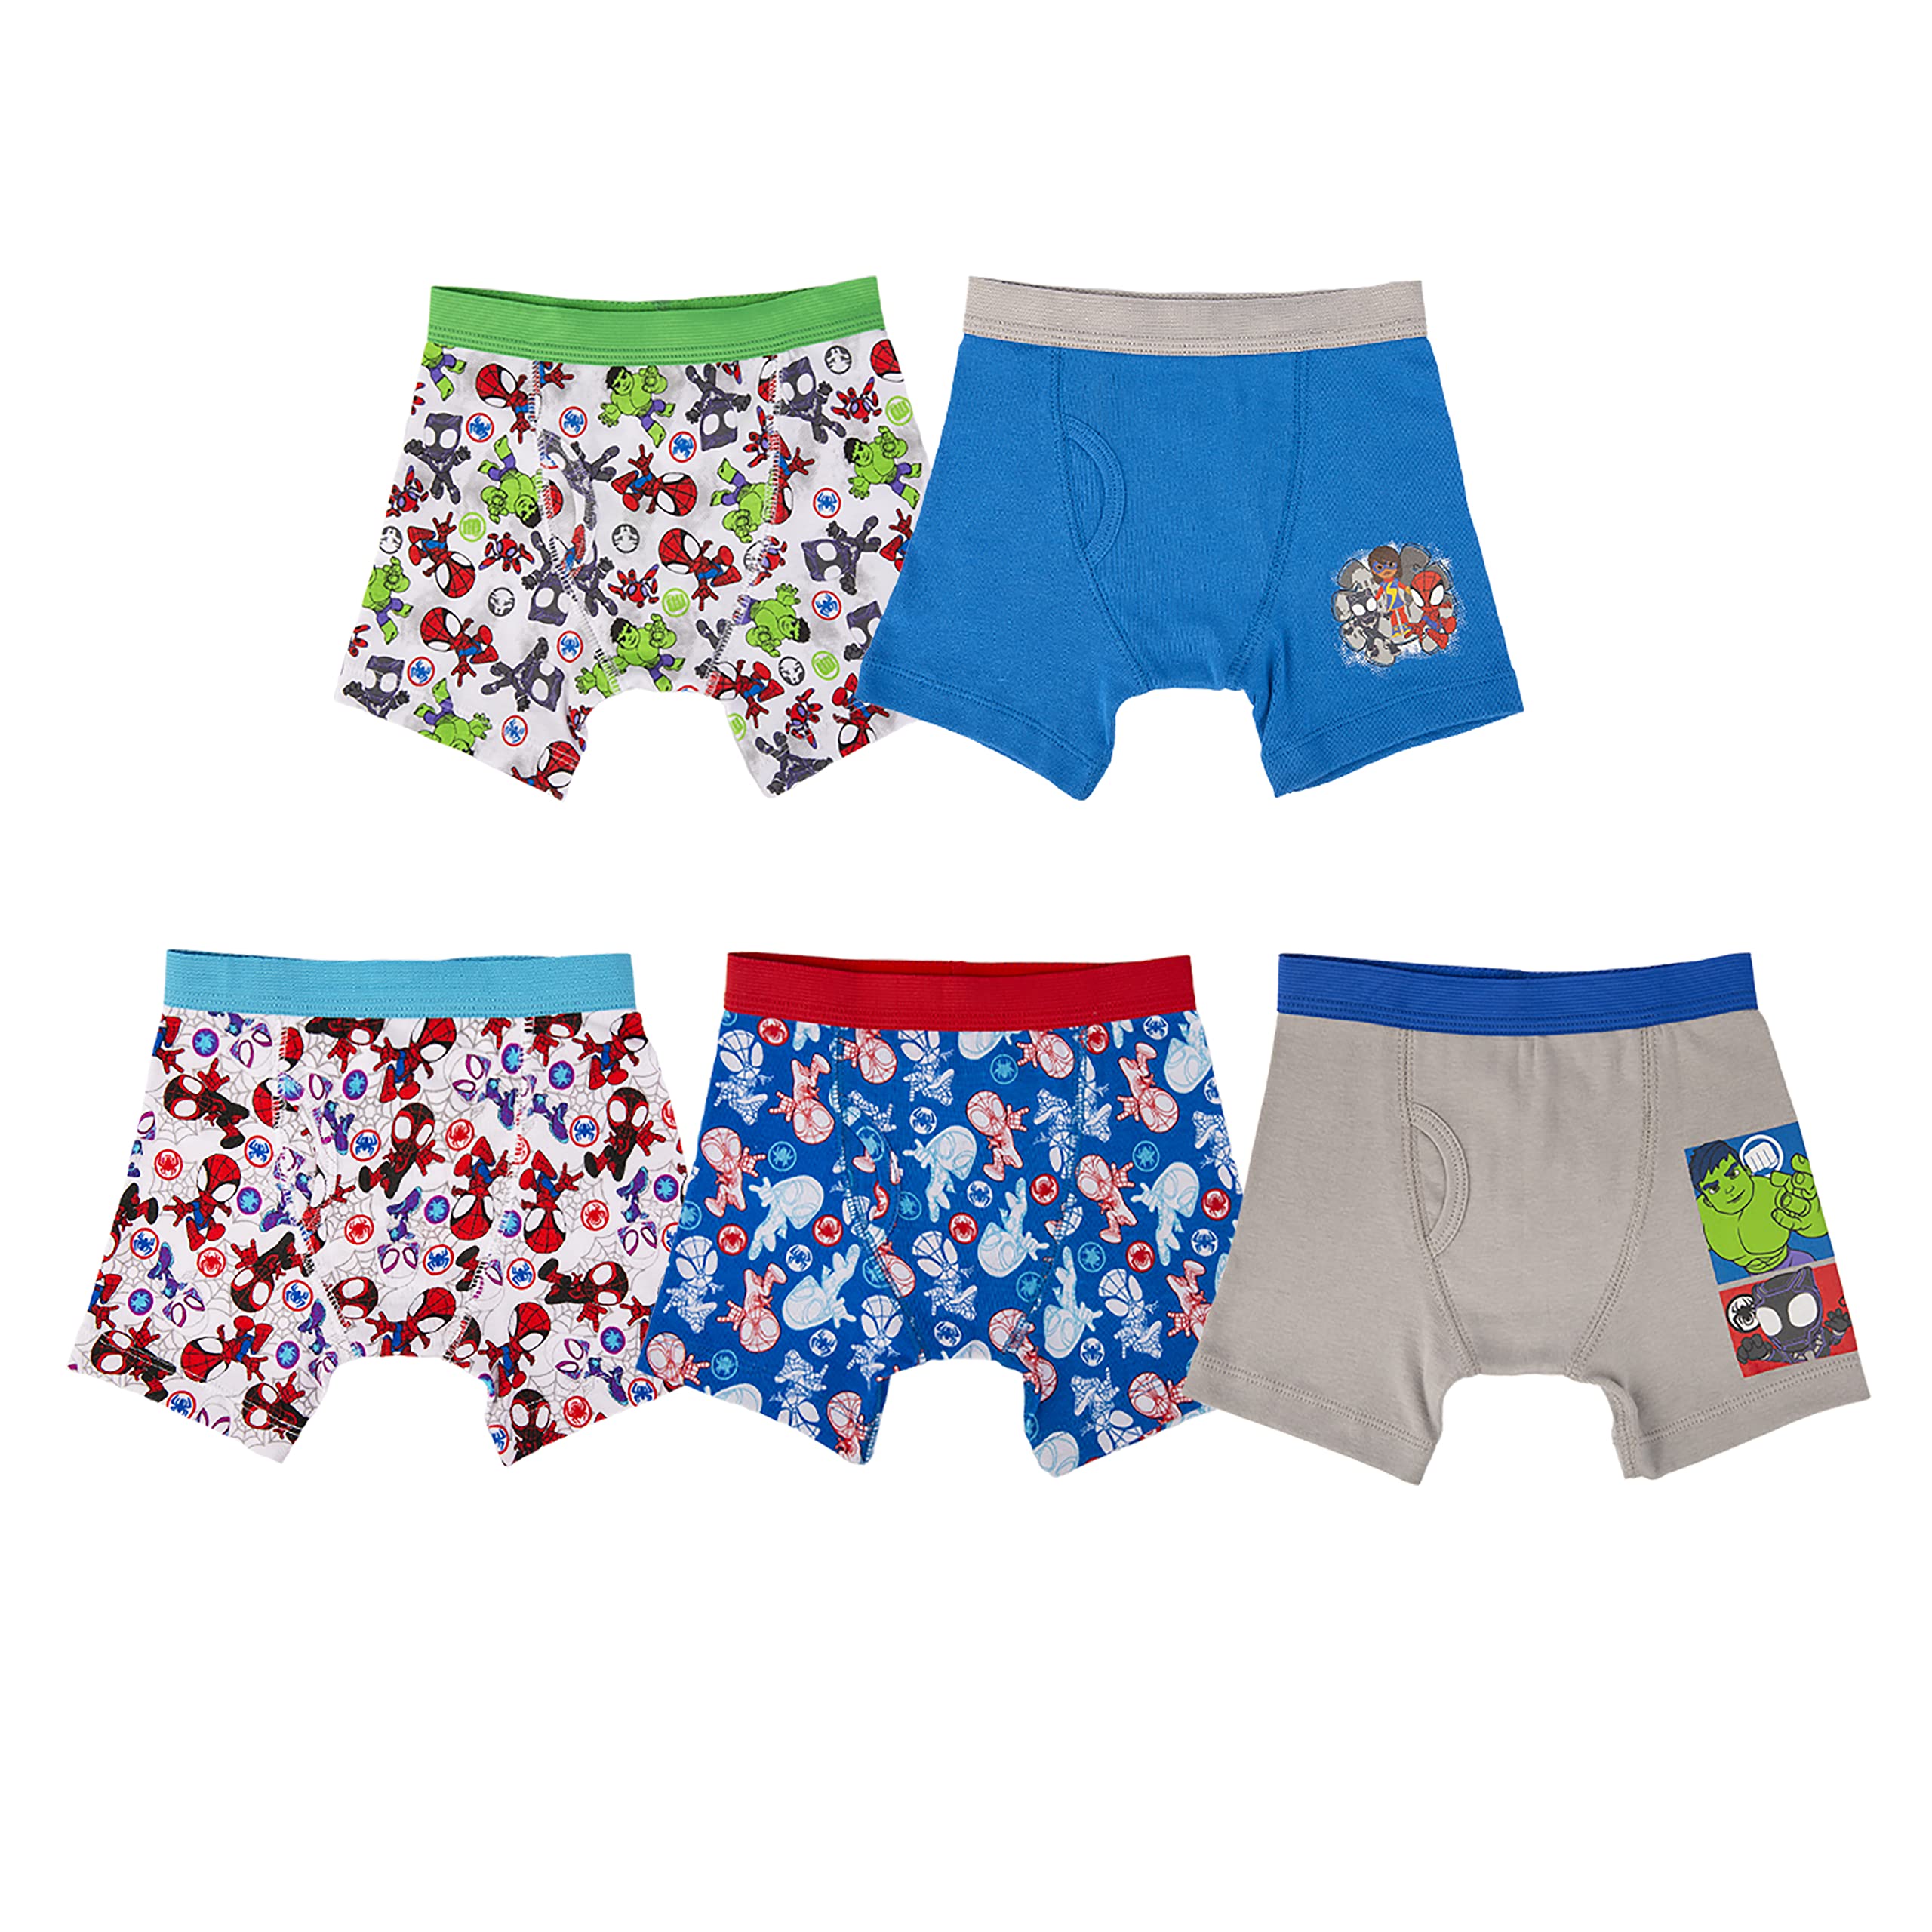 Marvel Spiderman and Super Hero Friends 100% Combed Cotton 5PK Boxer Briefs and 7PK or 10PK Briefs in Toddler sizes